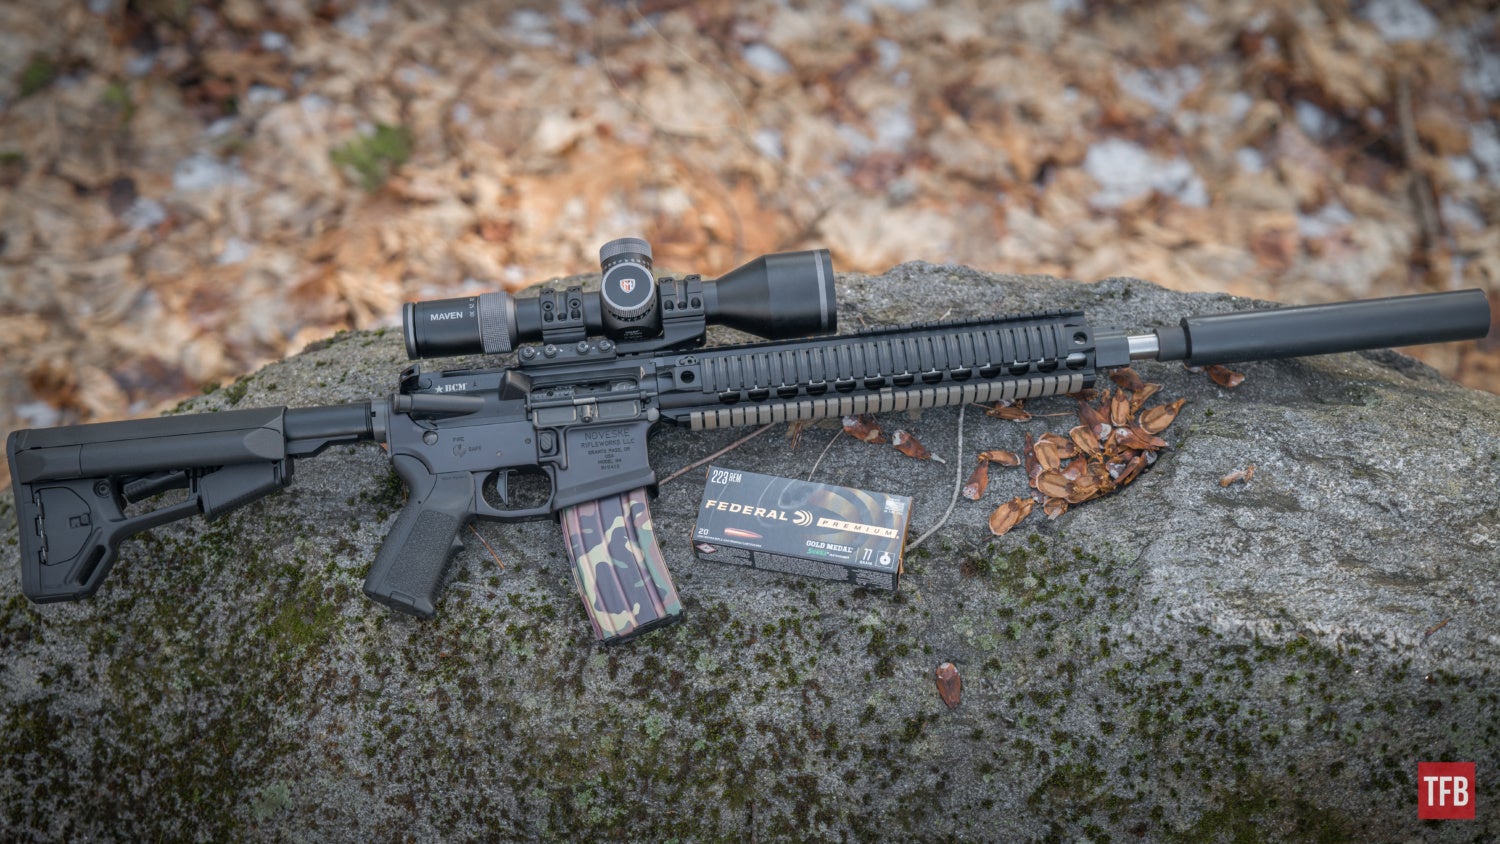 SILENCER SATURDAY #317: Sub MOA With The Quietest 556 AR-15 Suppressor In the Universe